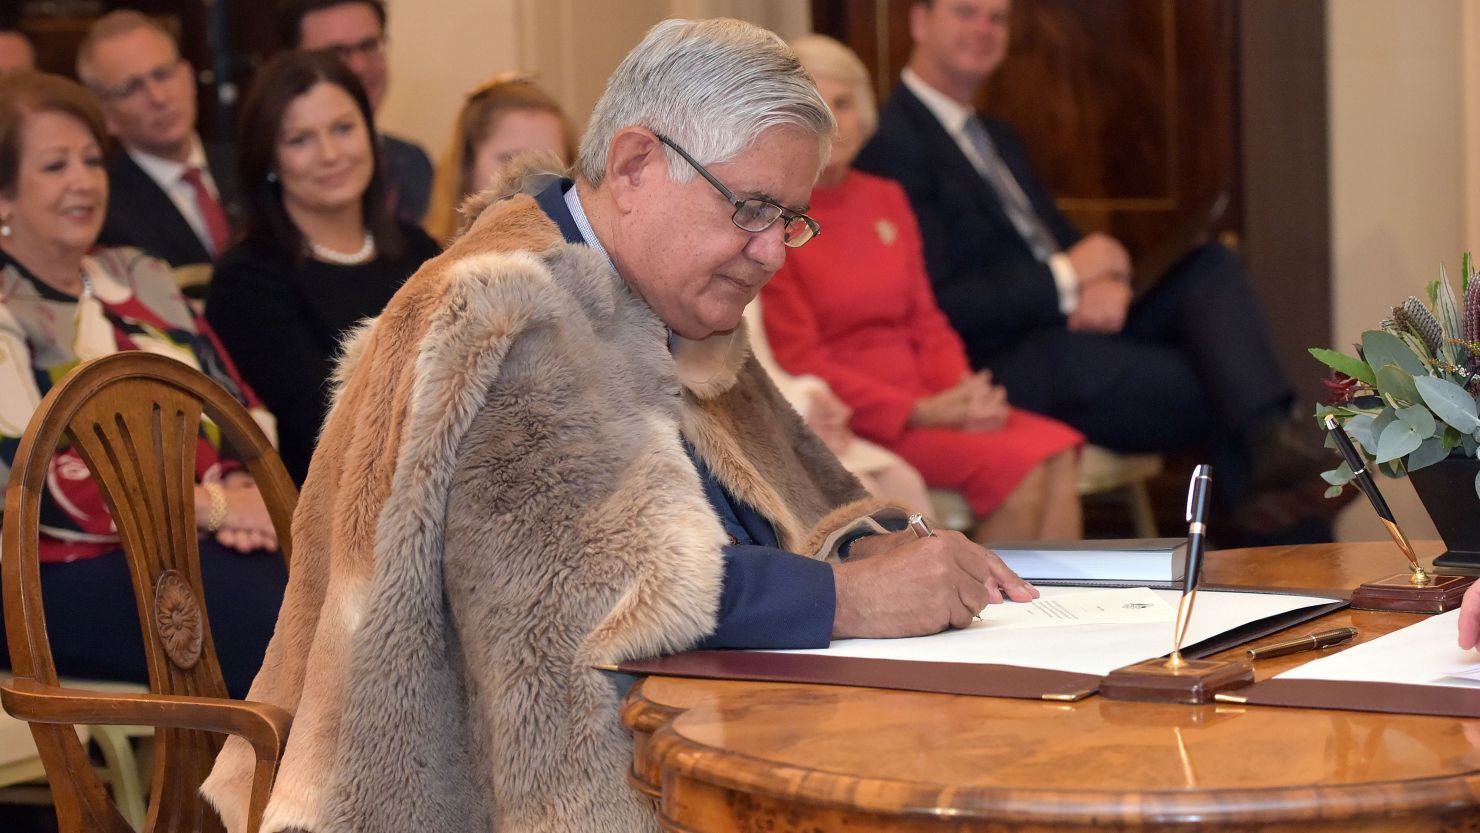 Minister for Indigenous Australians Ken Wyatt signs a document during an oath-taking ceremony at Government House in Canberra on May 29, 2019.